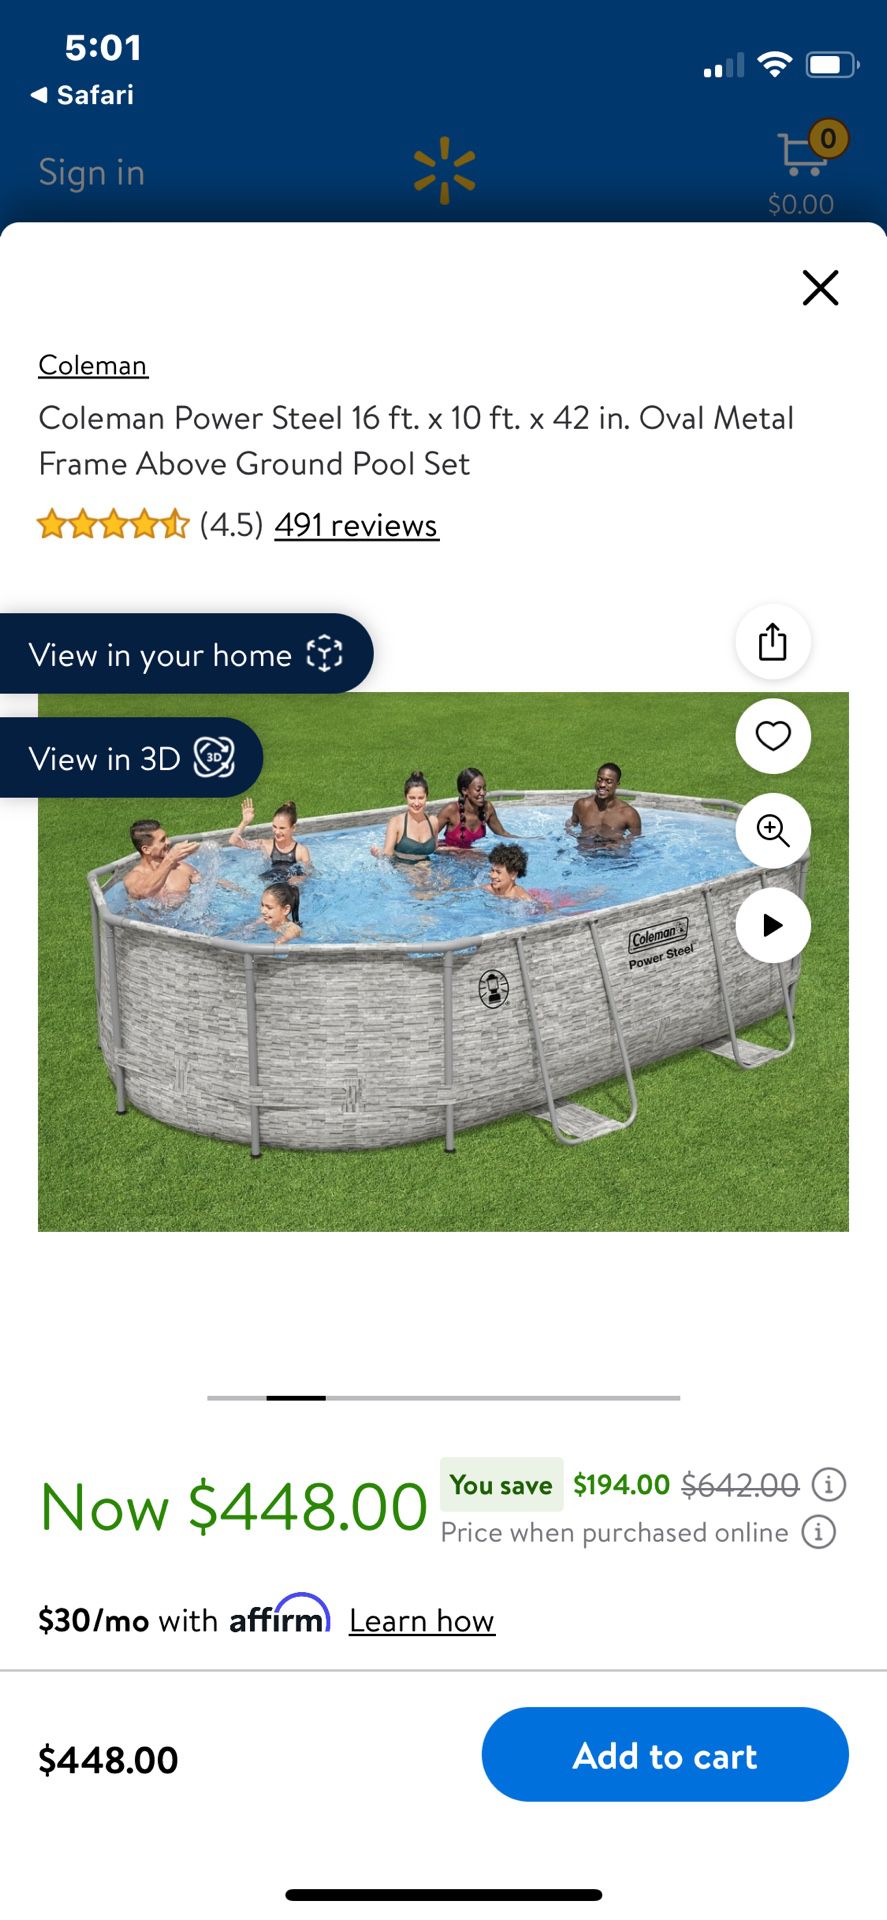 Coleman 16’x10’x42” Pool. With Upgraded Pump/filter And Media 